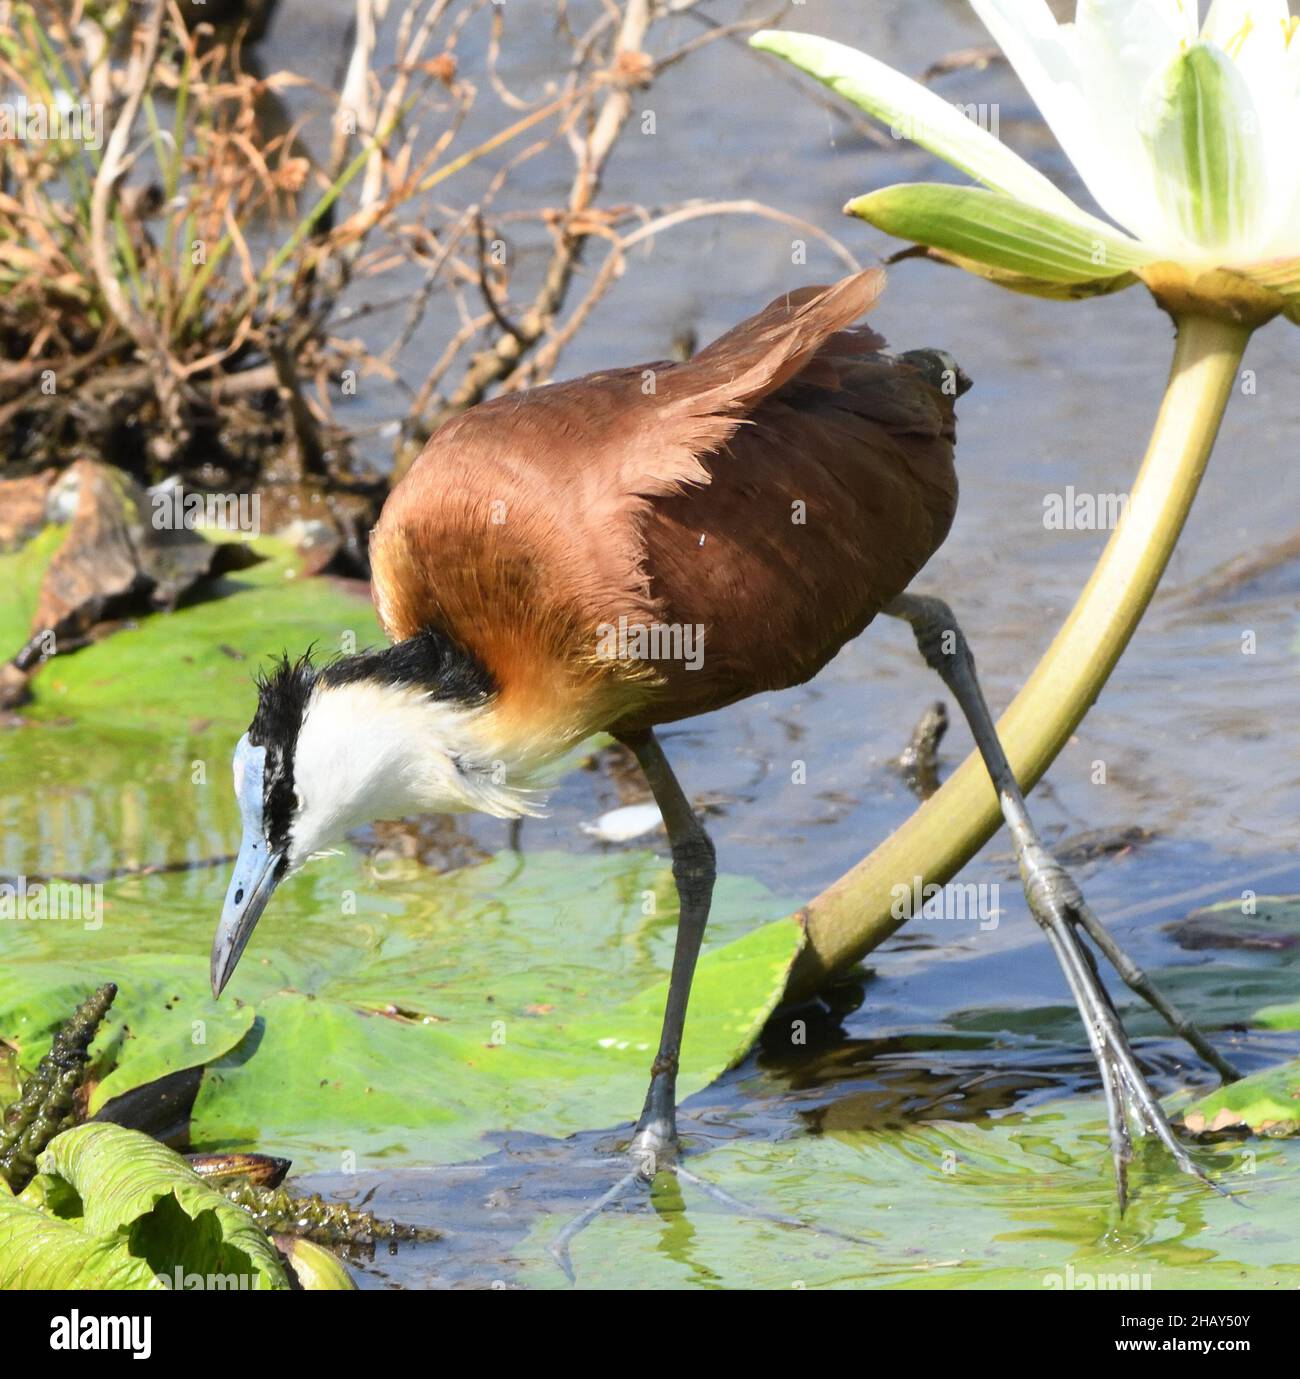 An African jacana (Actophilornis africanus) looking for invertebrate food uses its extraordinarily long toes to spread its weigh as it walks across wa Stock Photo